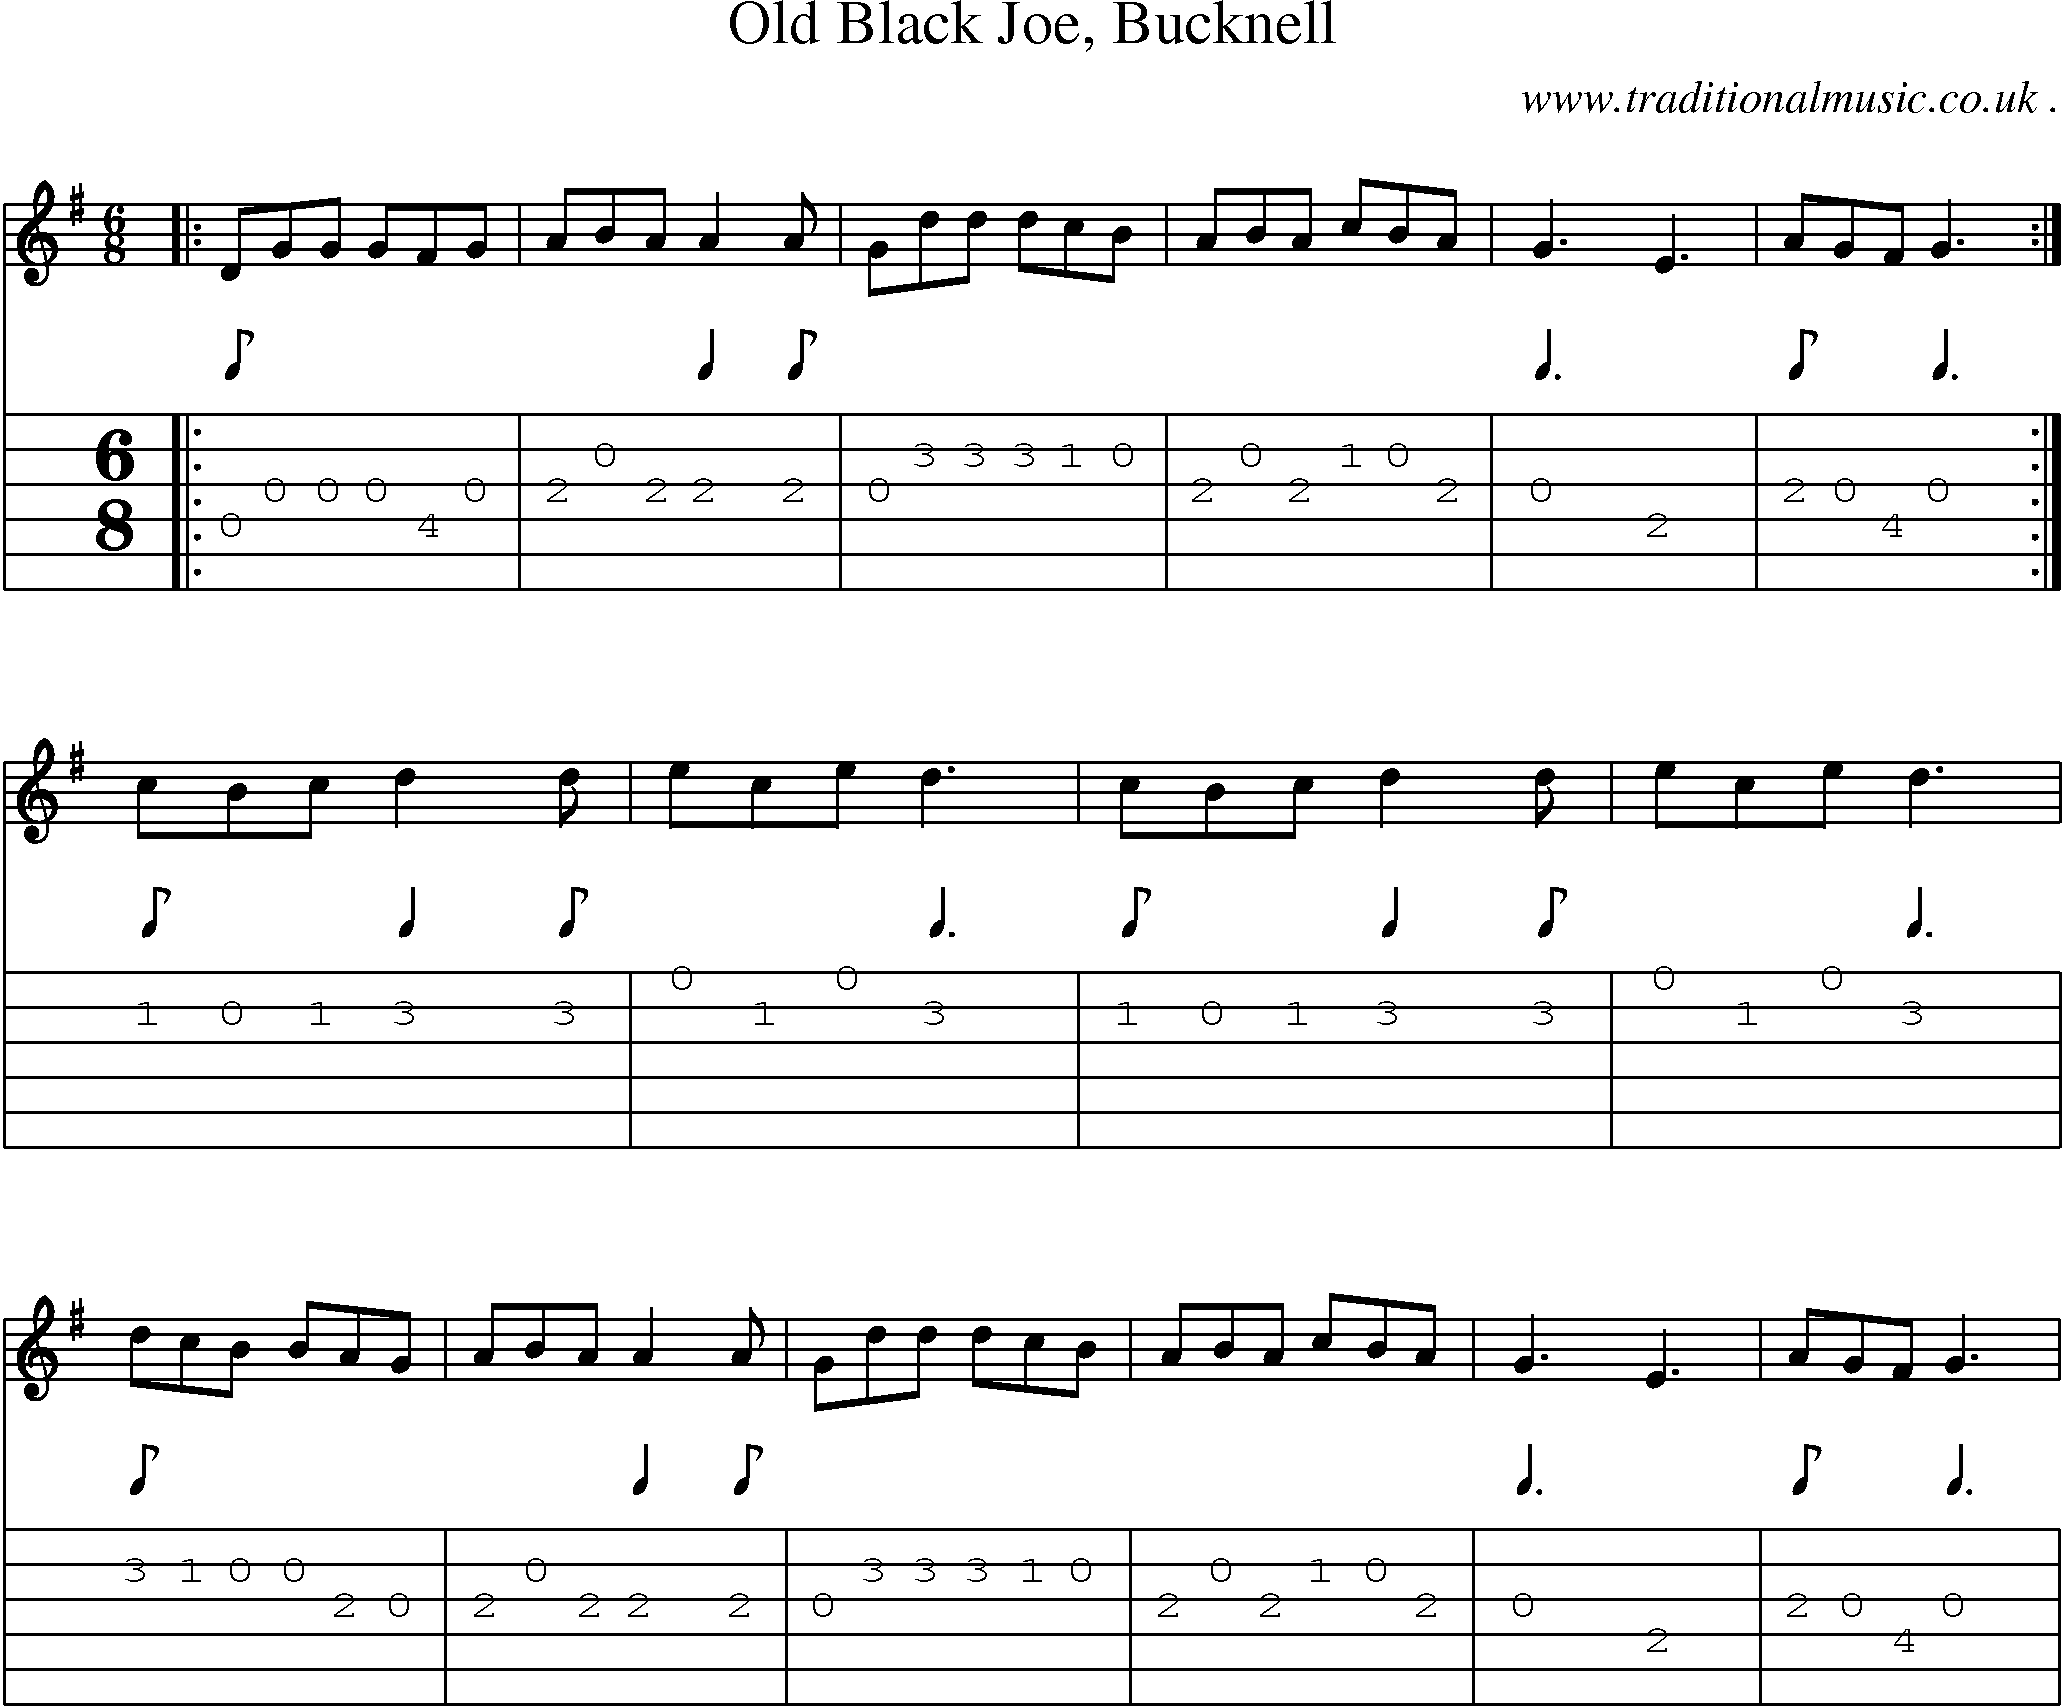 Sheet-Music and Guitar Tabs for Old Black Joe Bucknell